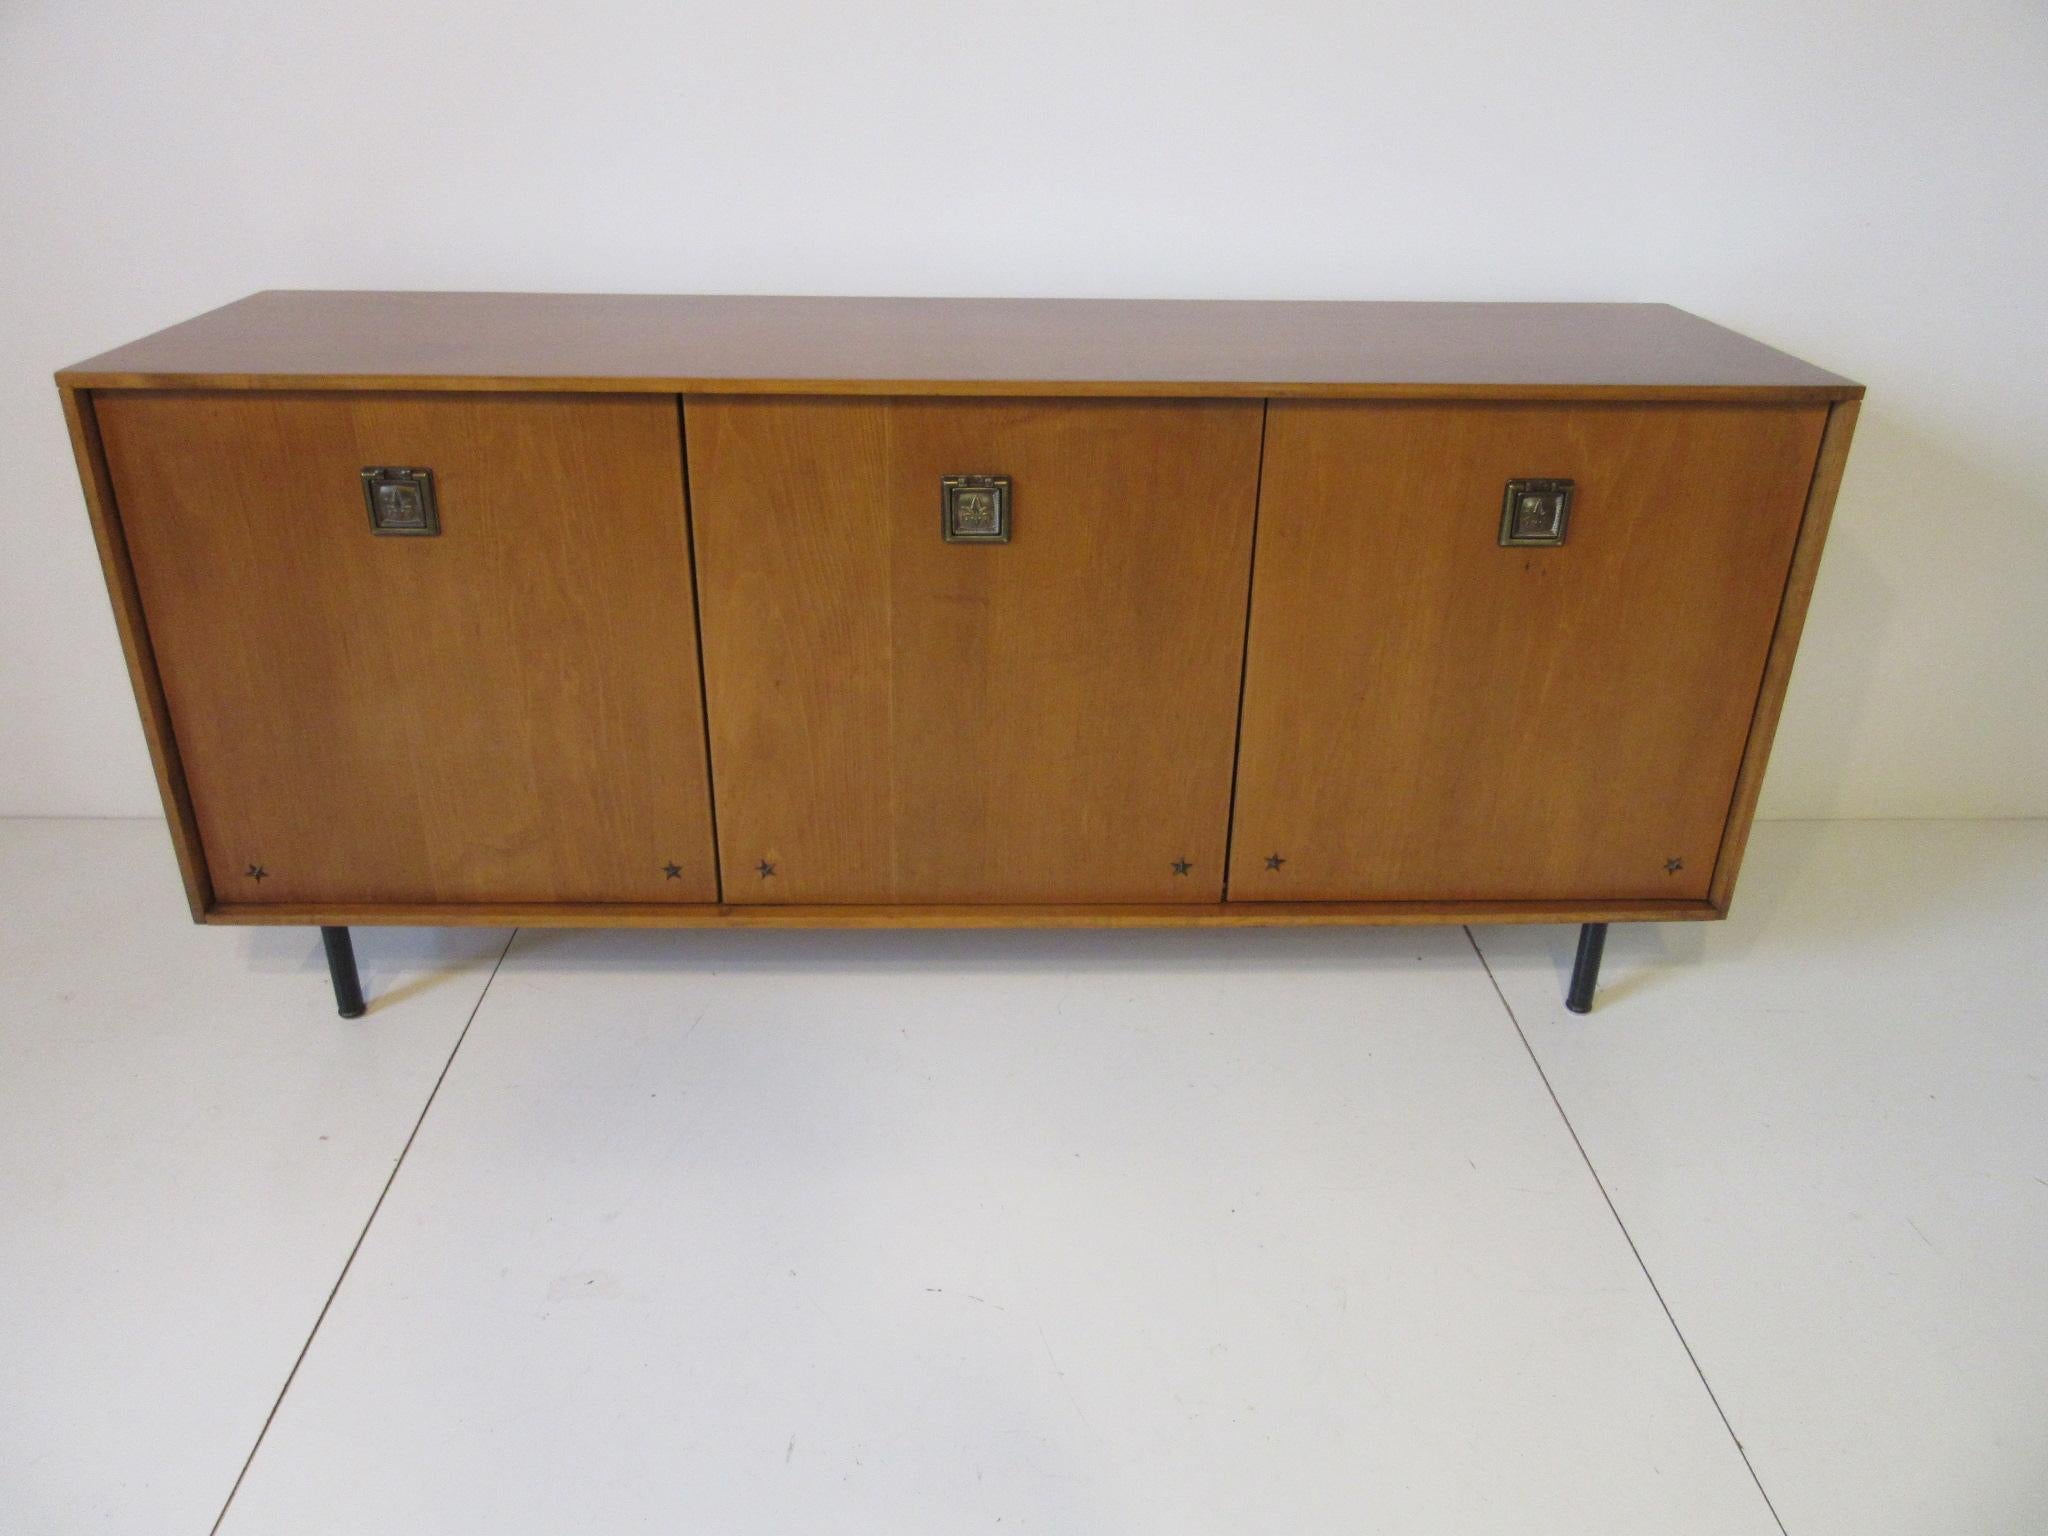 A three door solid maple credenza with drawers to the middle, fronts in satin black as well as the adjustable shelves to each ends and having a finished backside. Sitting on satin black steel legs with brass ornamental pulls and details in the